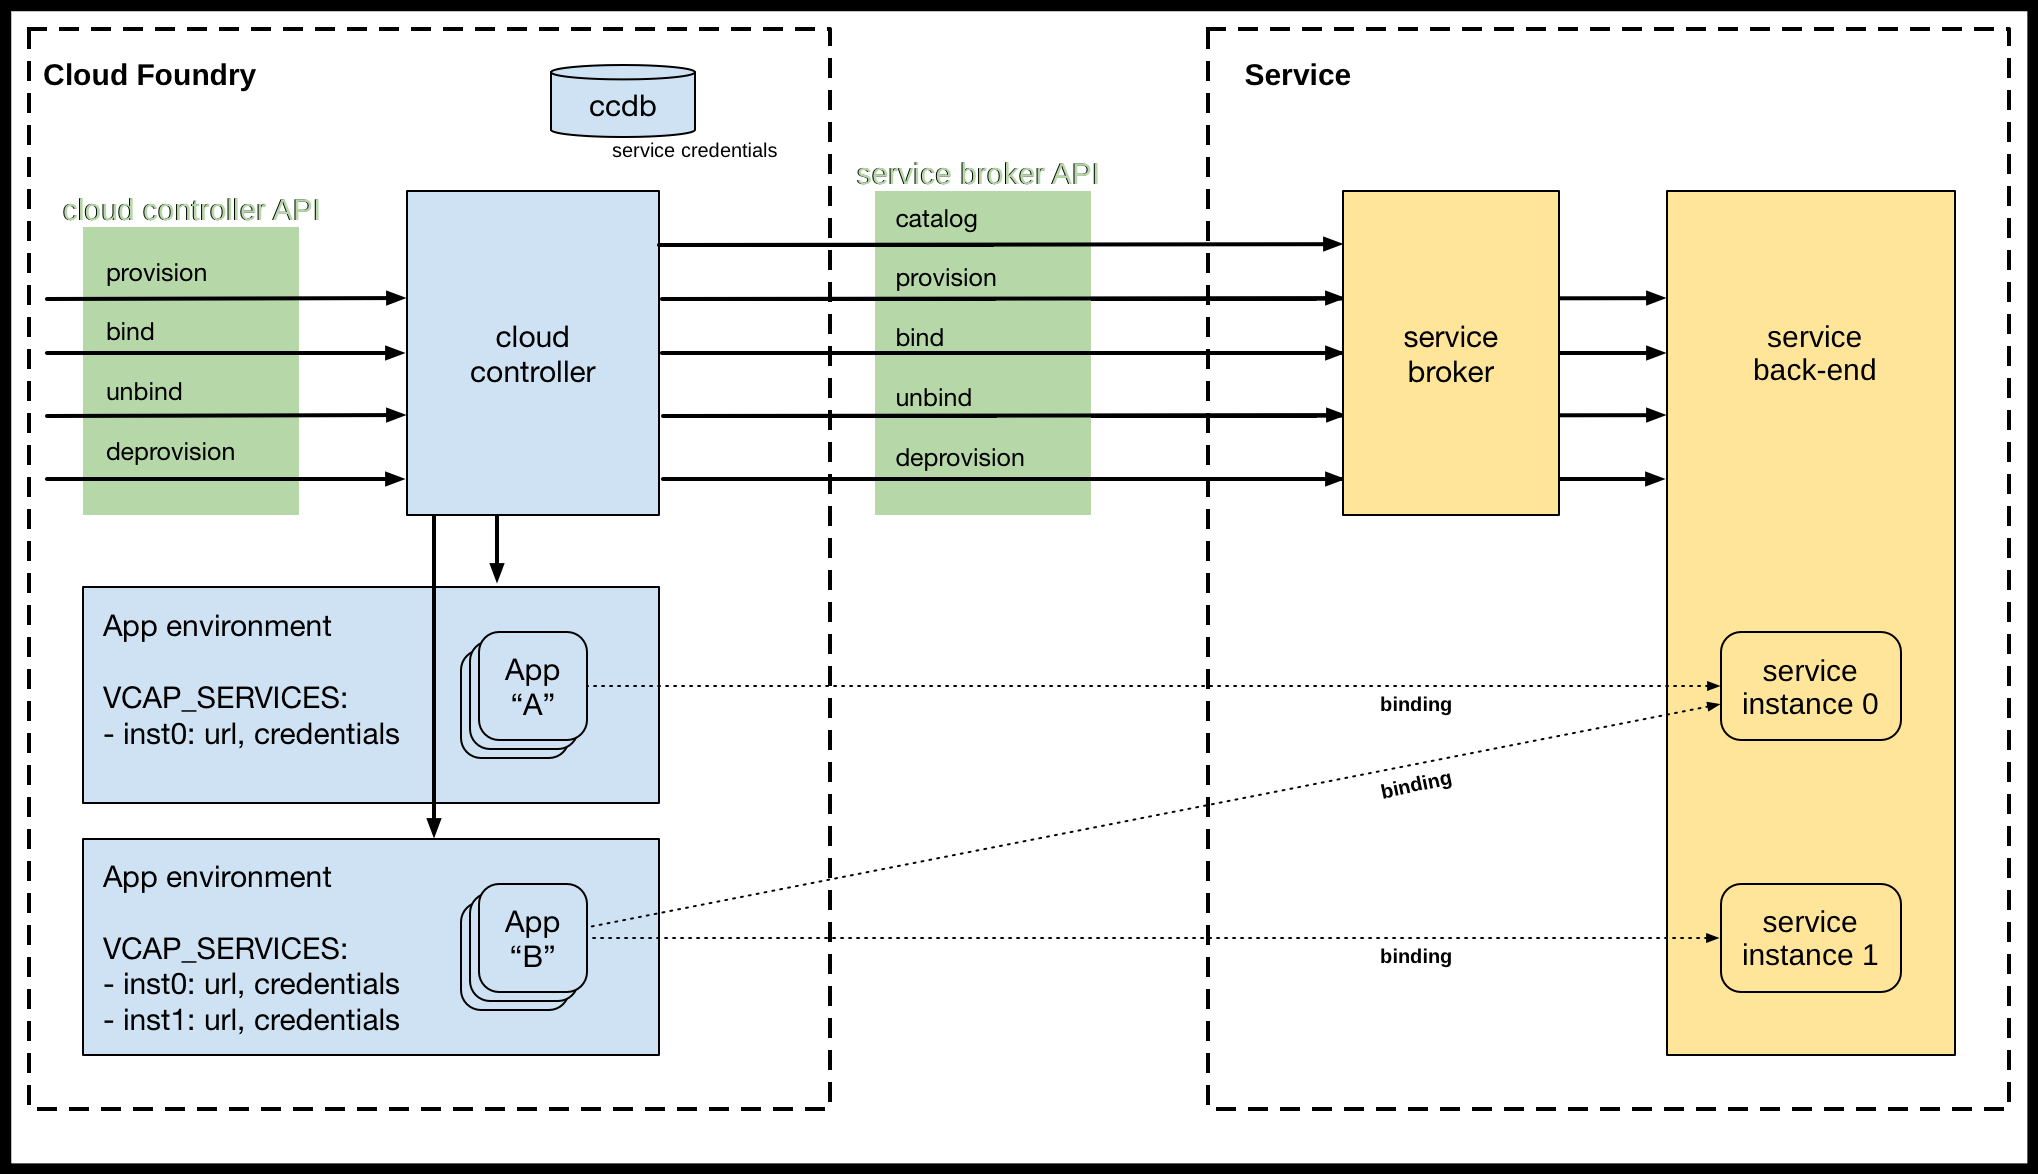 Services interact with the Cloud Foundry. The diagram shows the following components: Service Broker, cloud controller, App environment, and 'service instances.